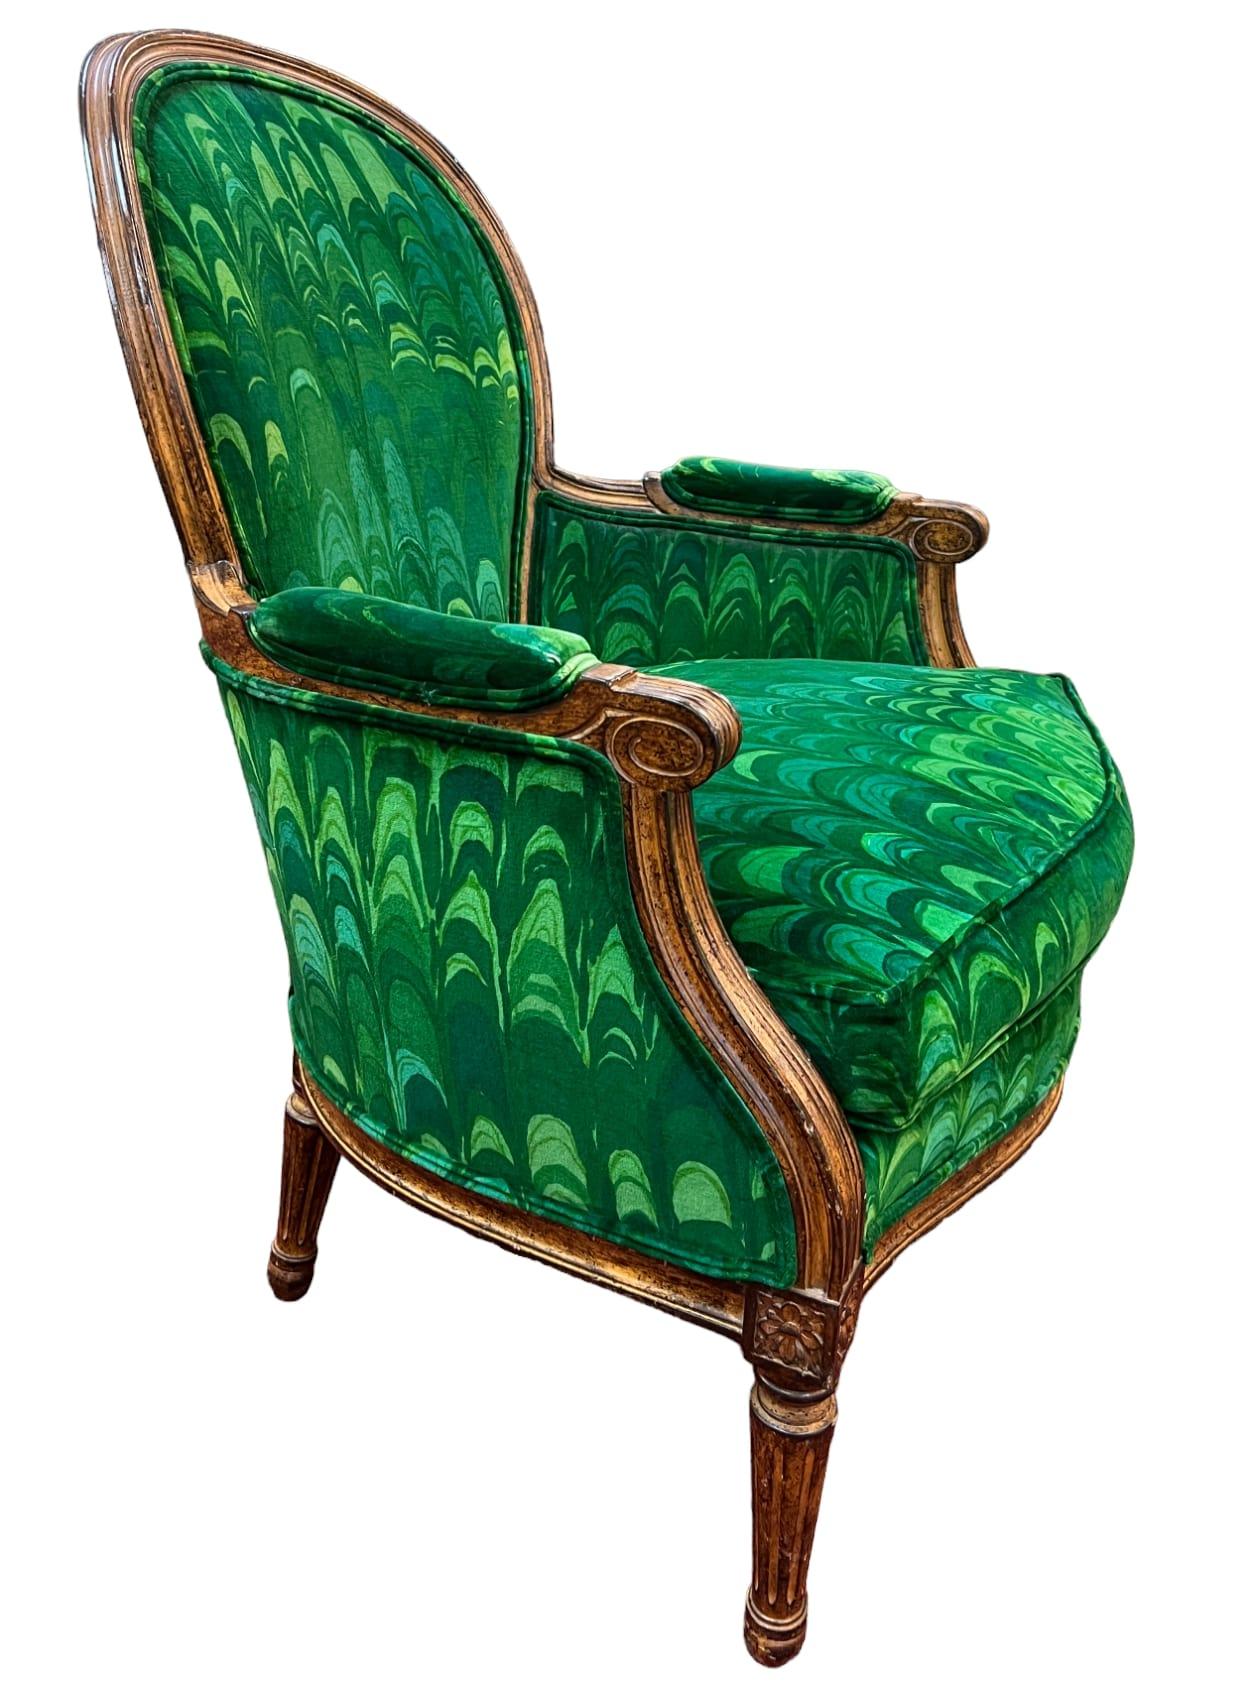 A pair of Louis XVI-style Fauteuil armchairs crafted by Lewis Mittman Inc. These armchairs are upholstered in a contrasting vibrant green velvet fabric in a peacock pattern. The peacock pattern adds a unique visual element to the chairs. The double